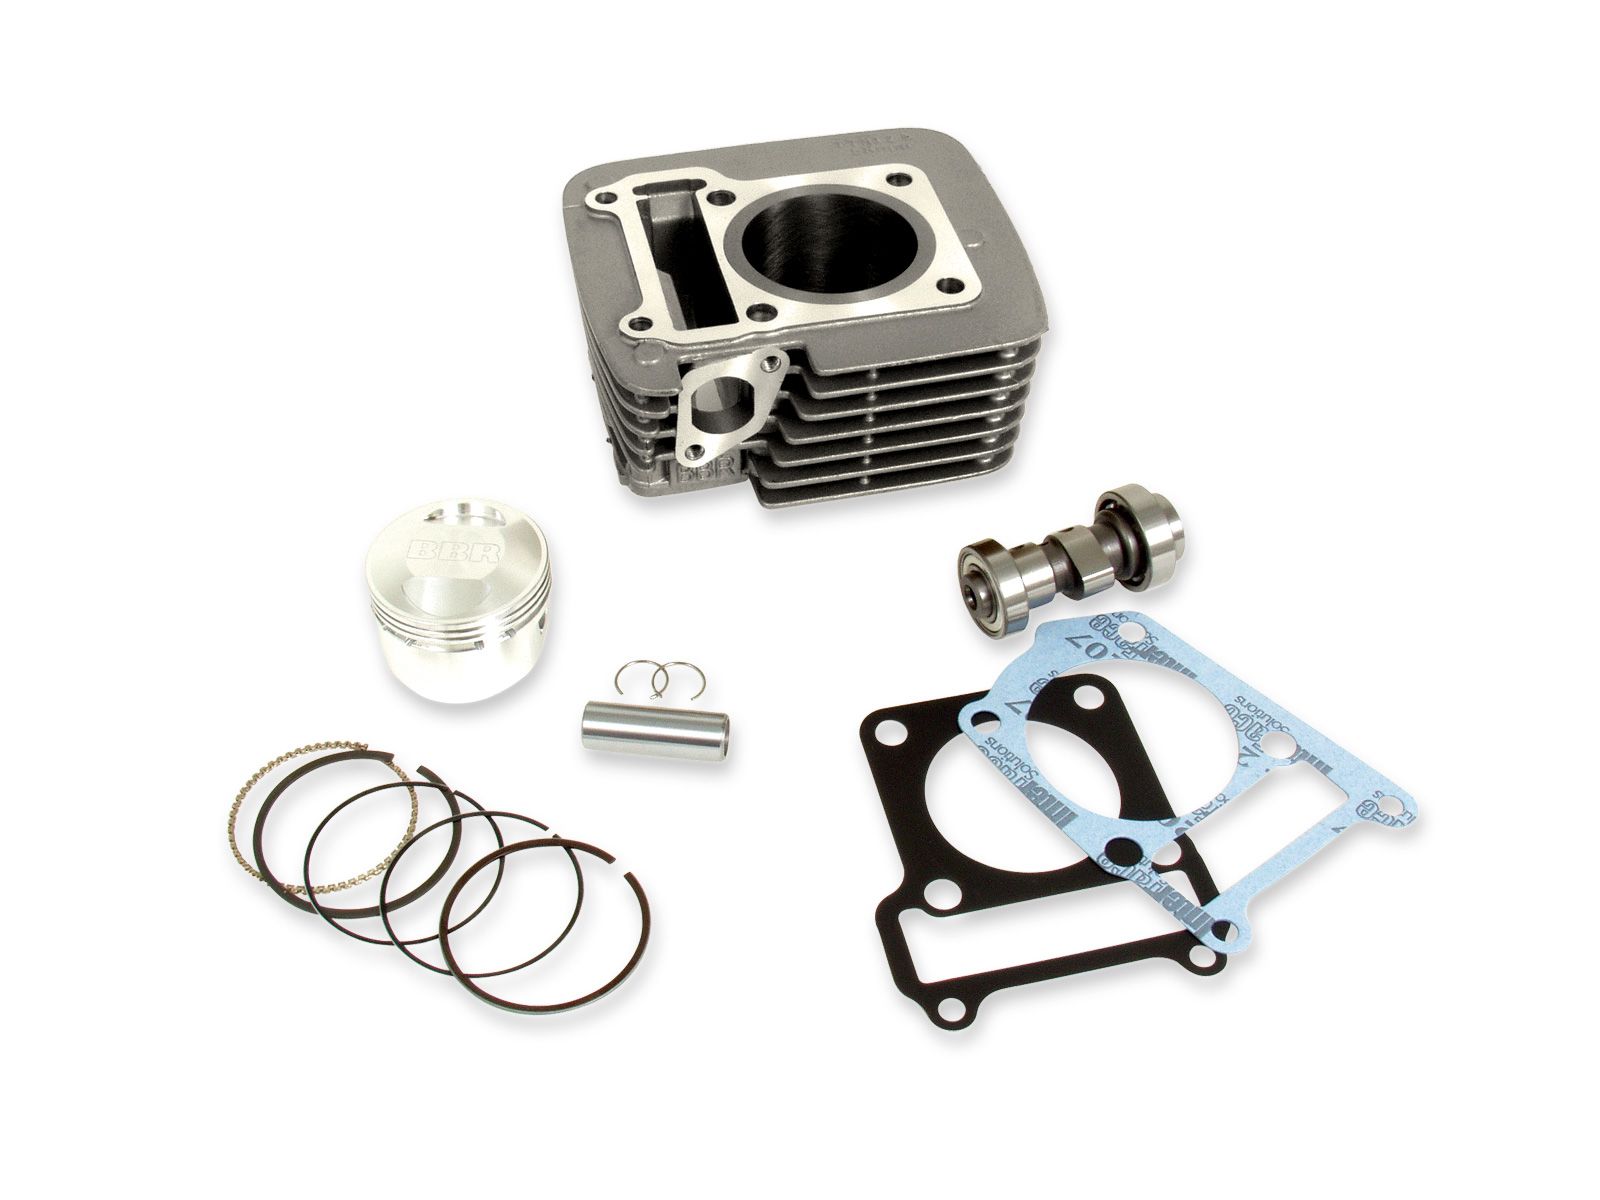 TT-R 150 Big Bore Kit with Cam